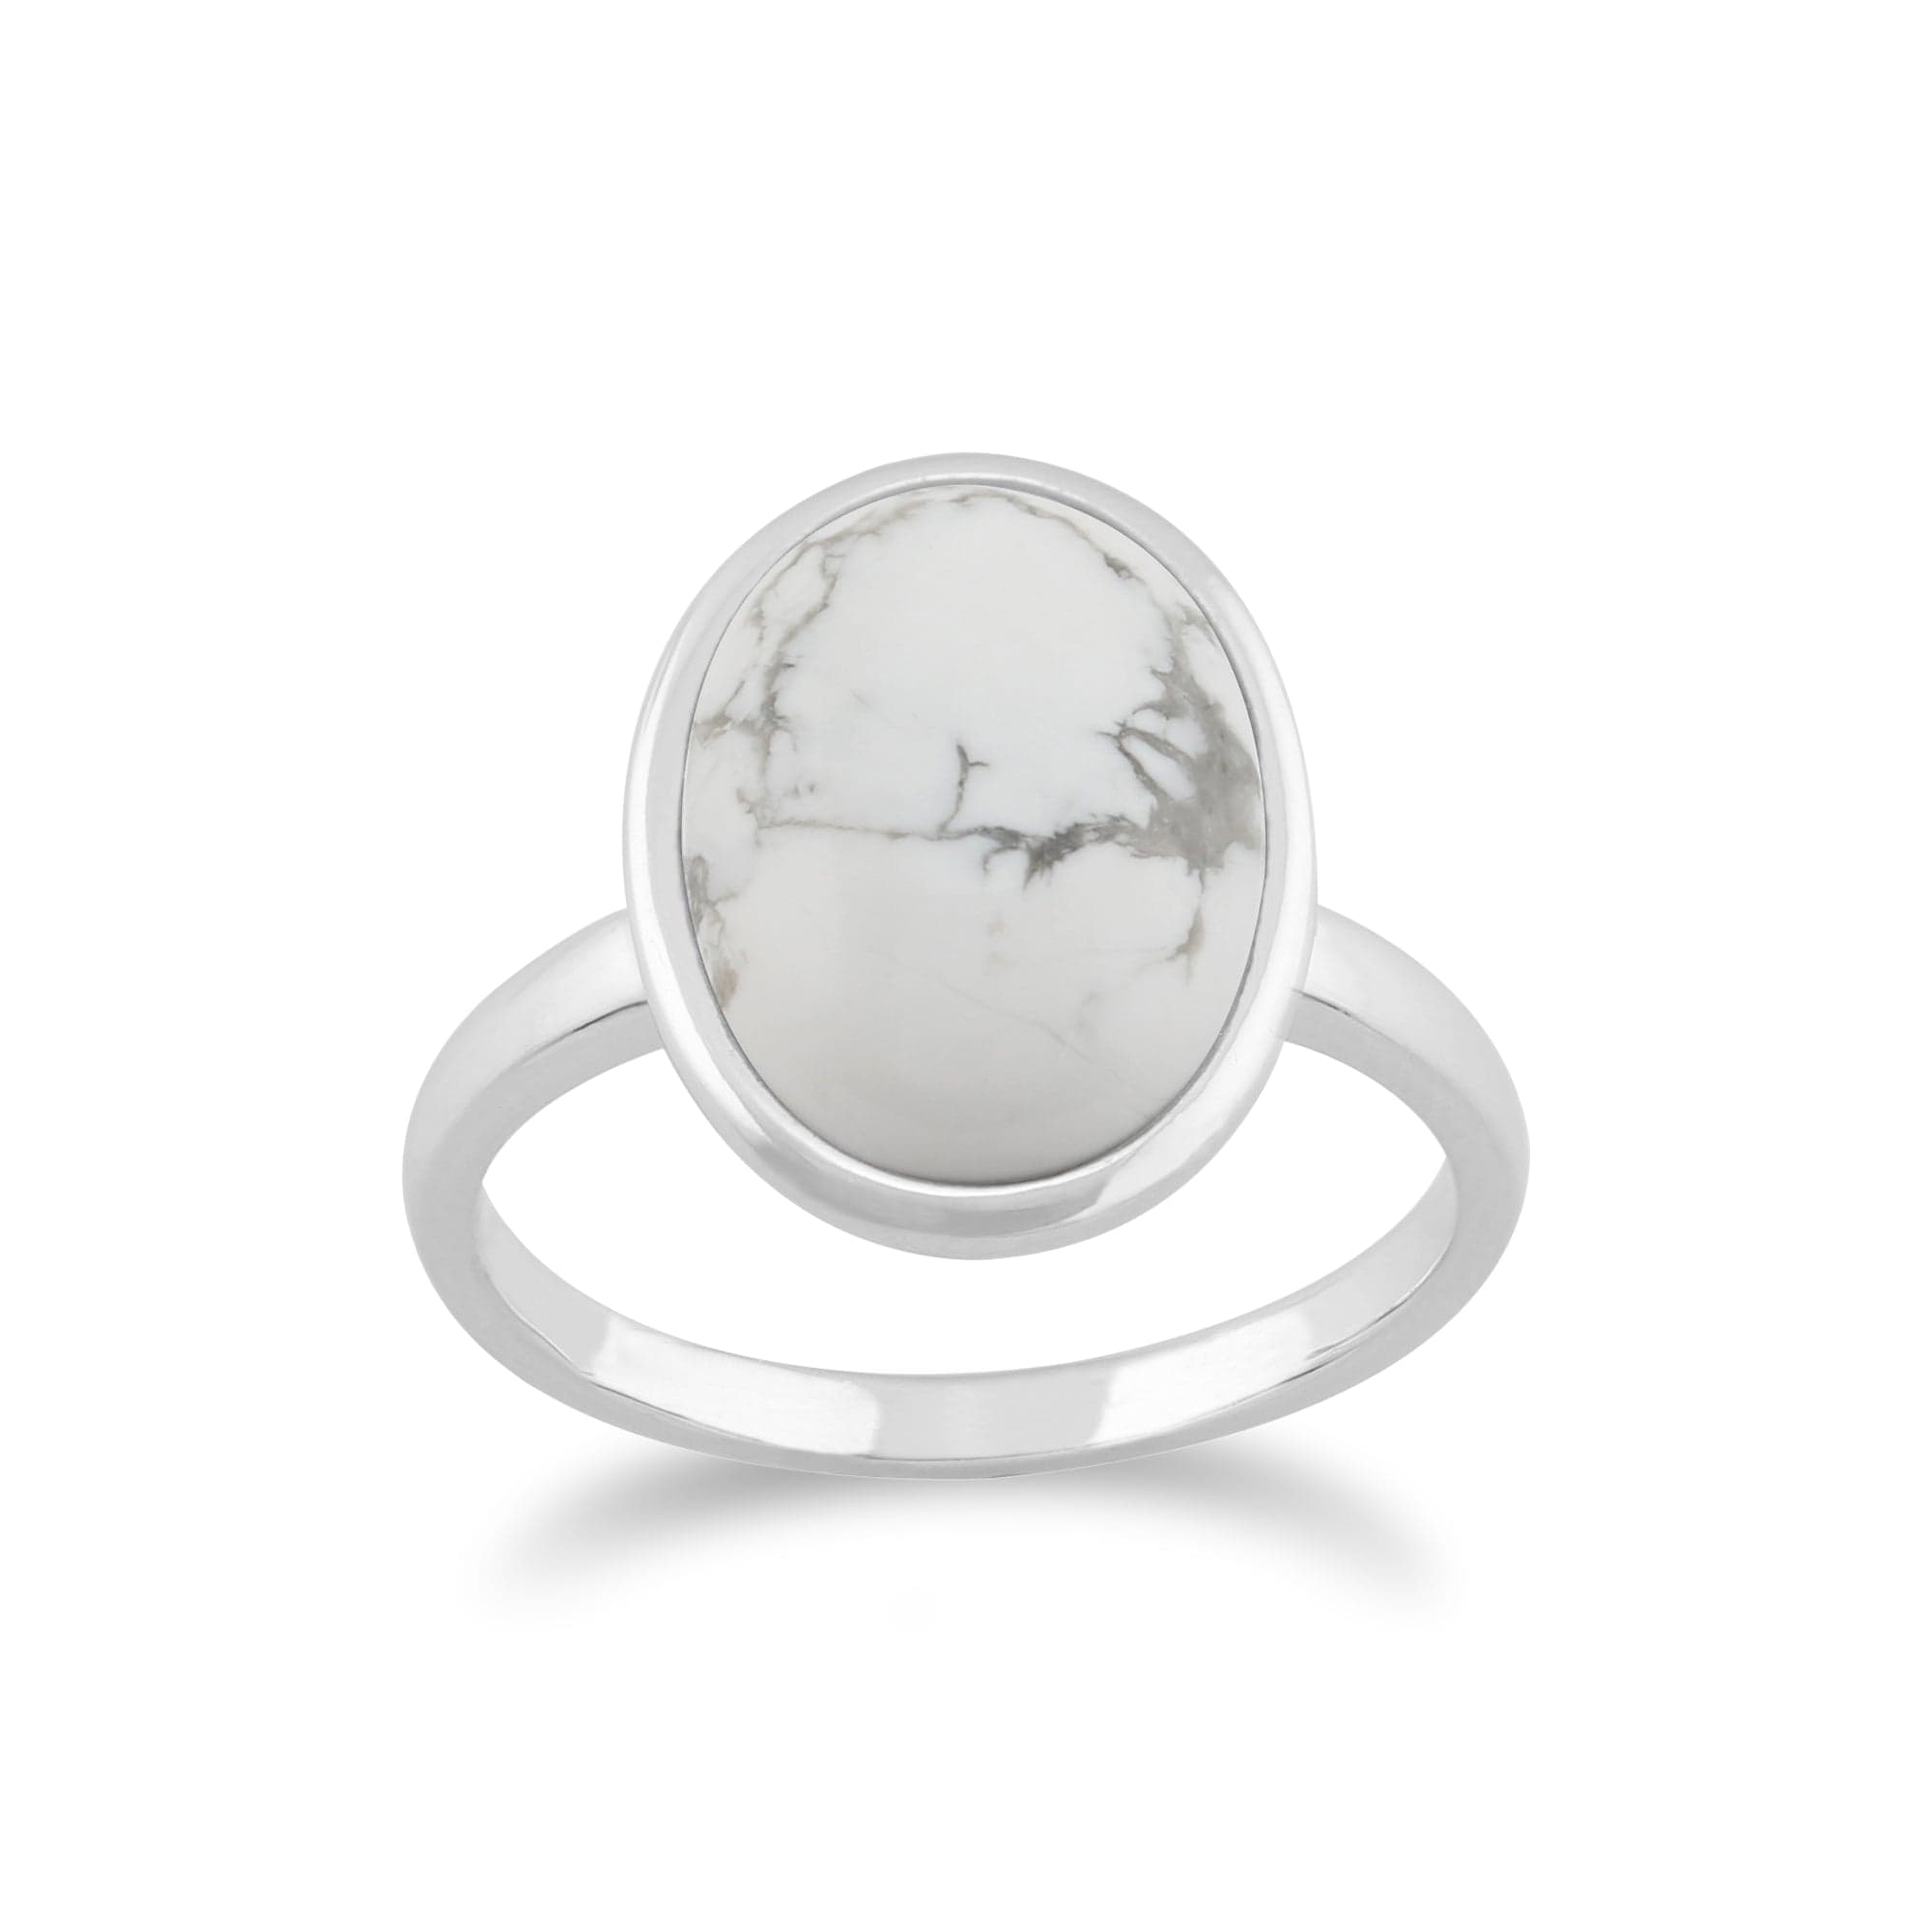 Classic Oval Magnesite Cabochon Boho Cocktail Ring in 925 Sterling Silver - Gemondo